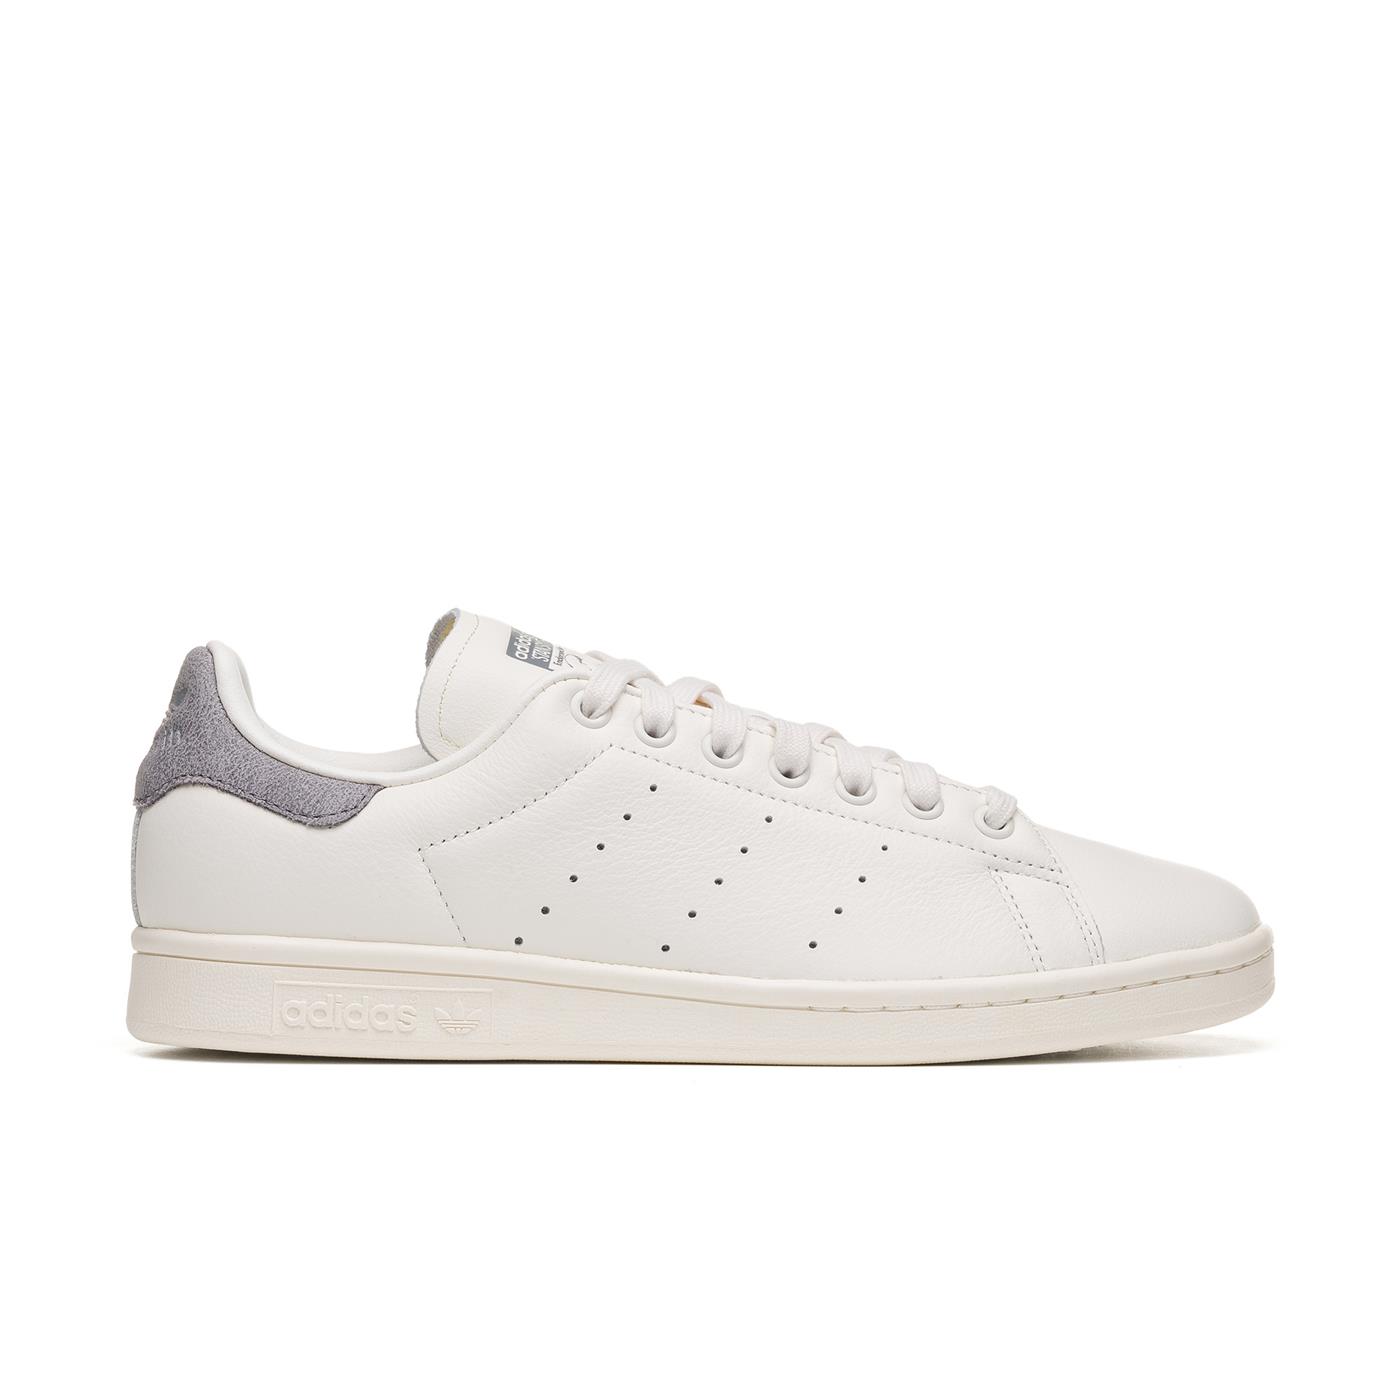 Sneakers adidas Originals Stan Smith White for Man | GY0028 | XTREME.PT